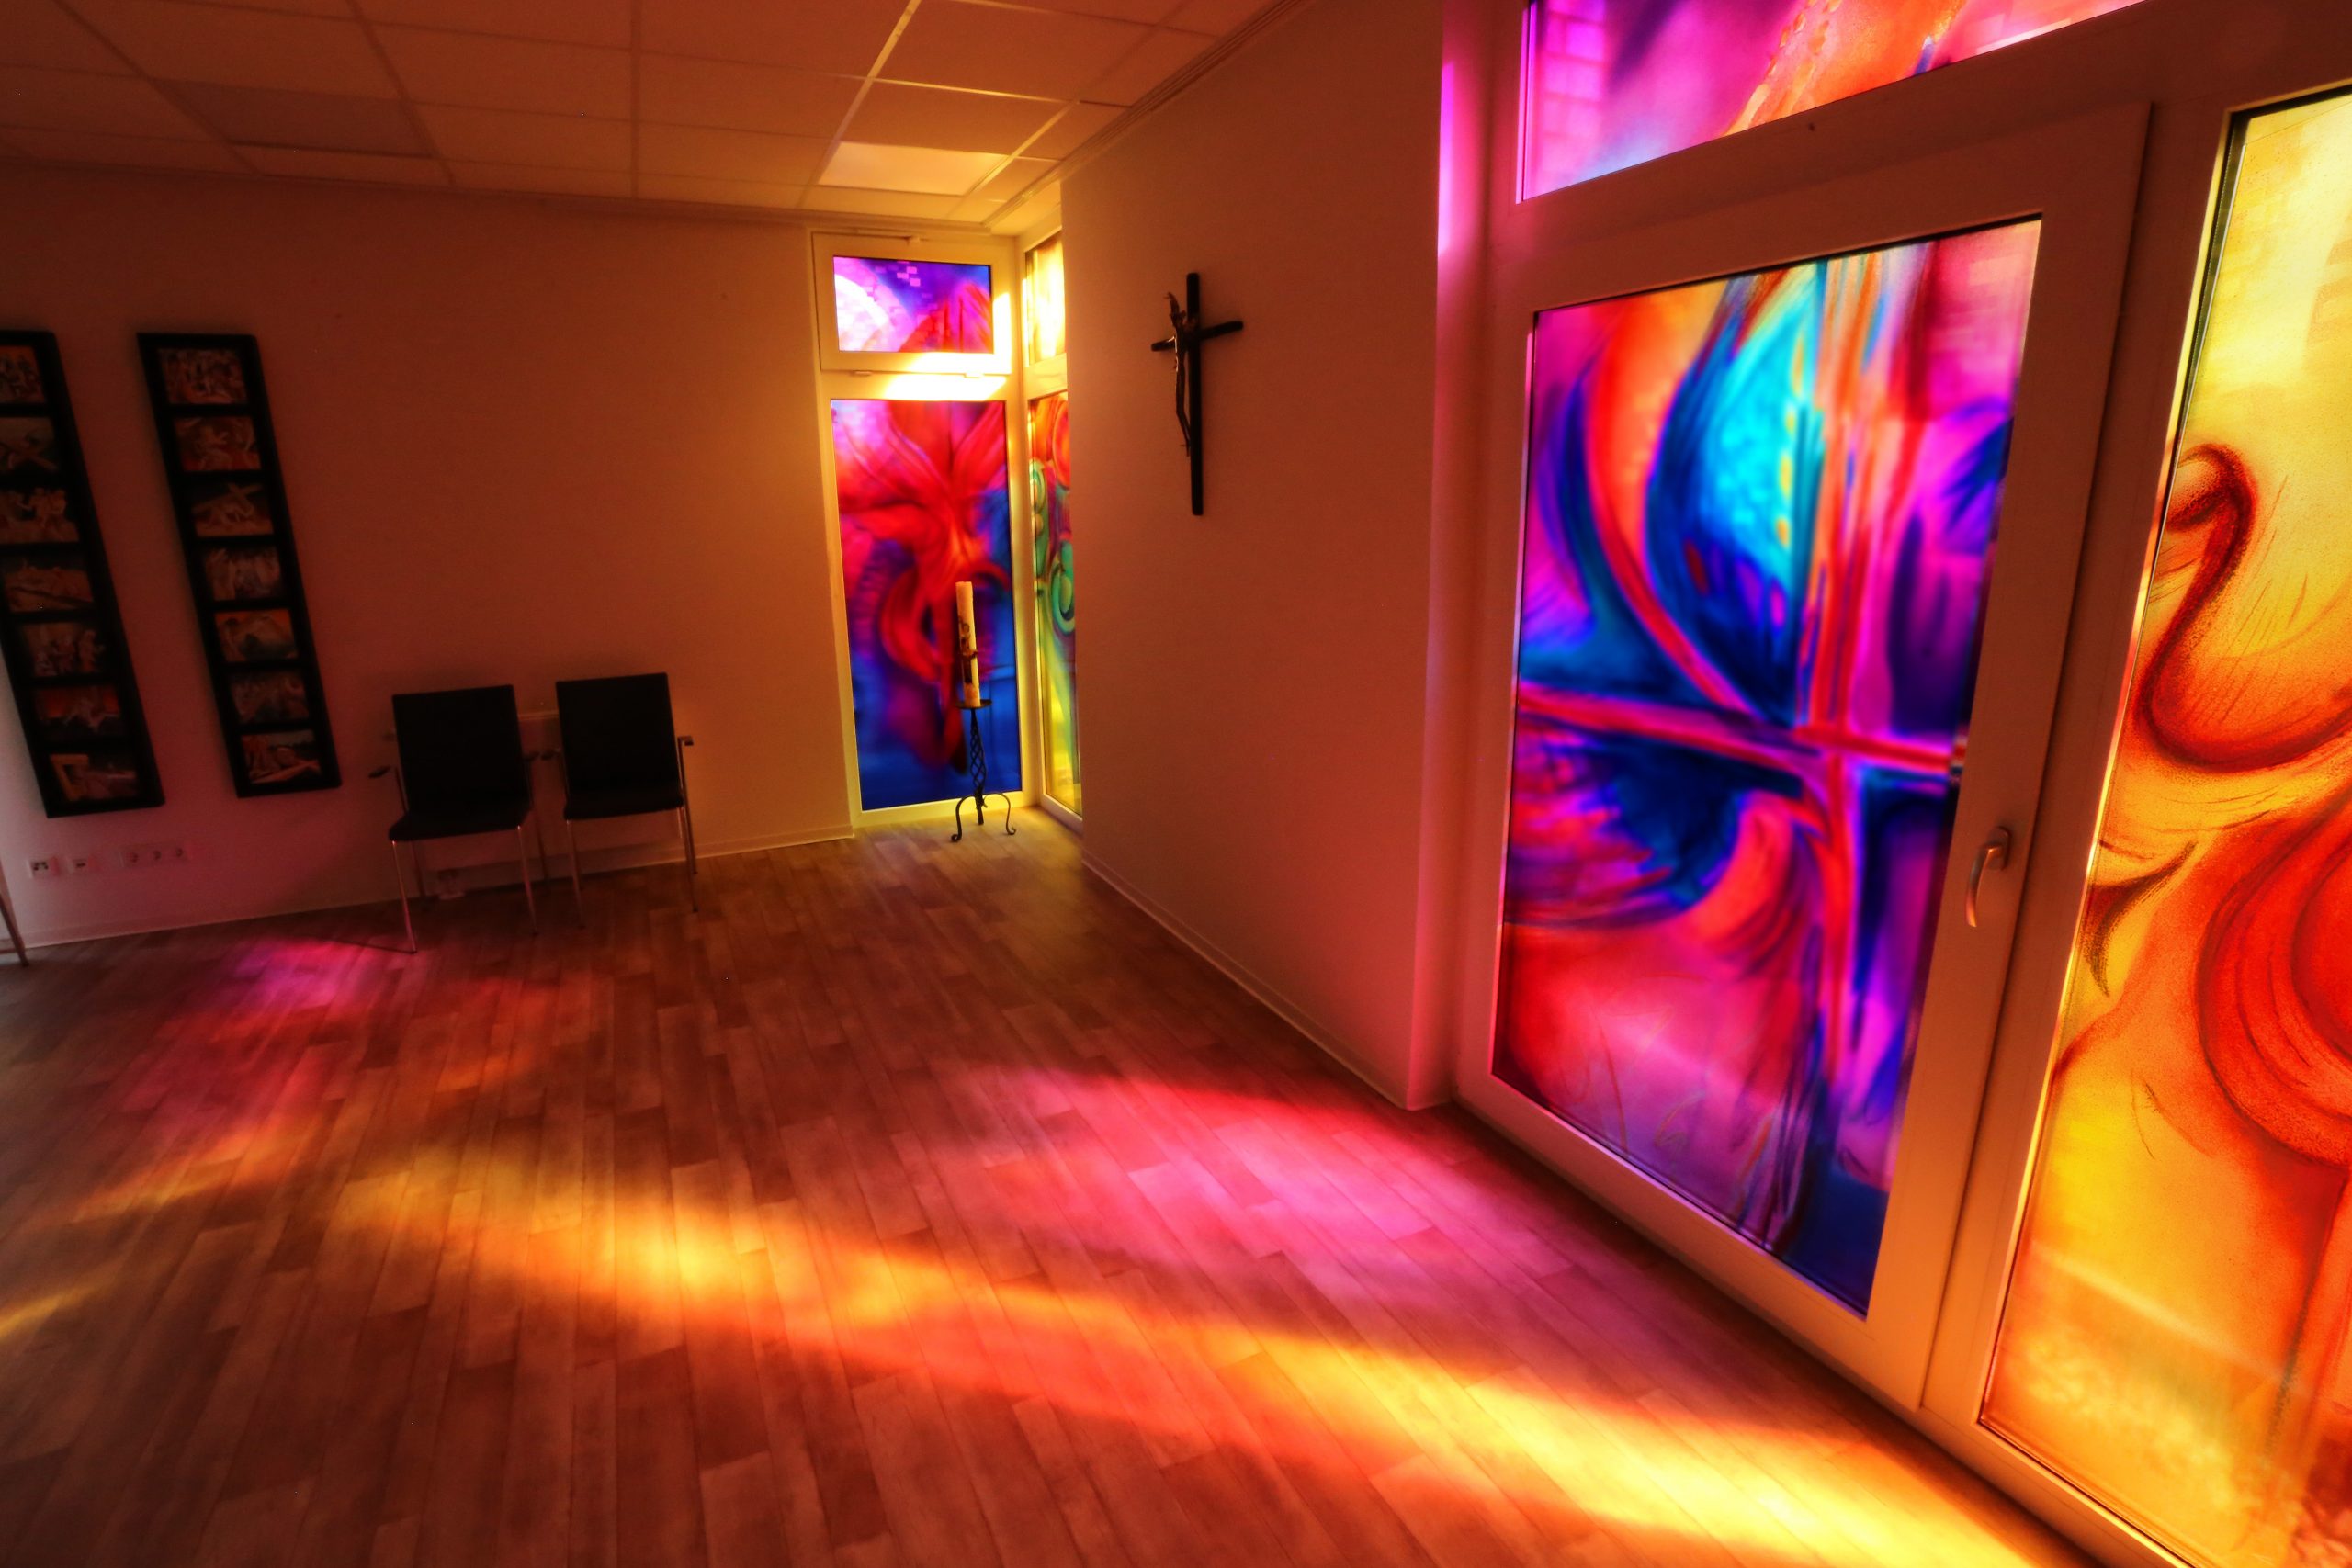 All colors of the soul  |  New Chapel of St. Hildegard